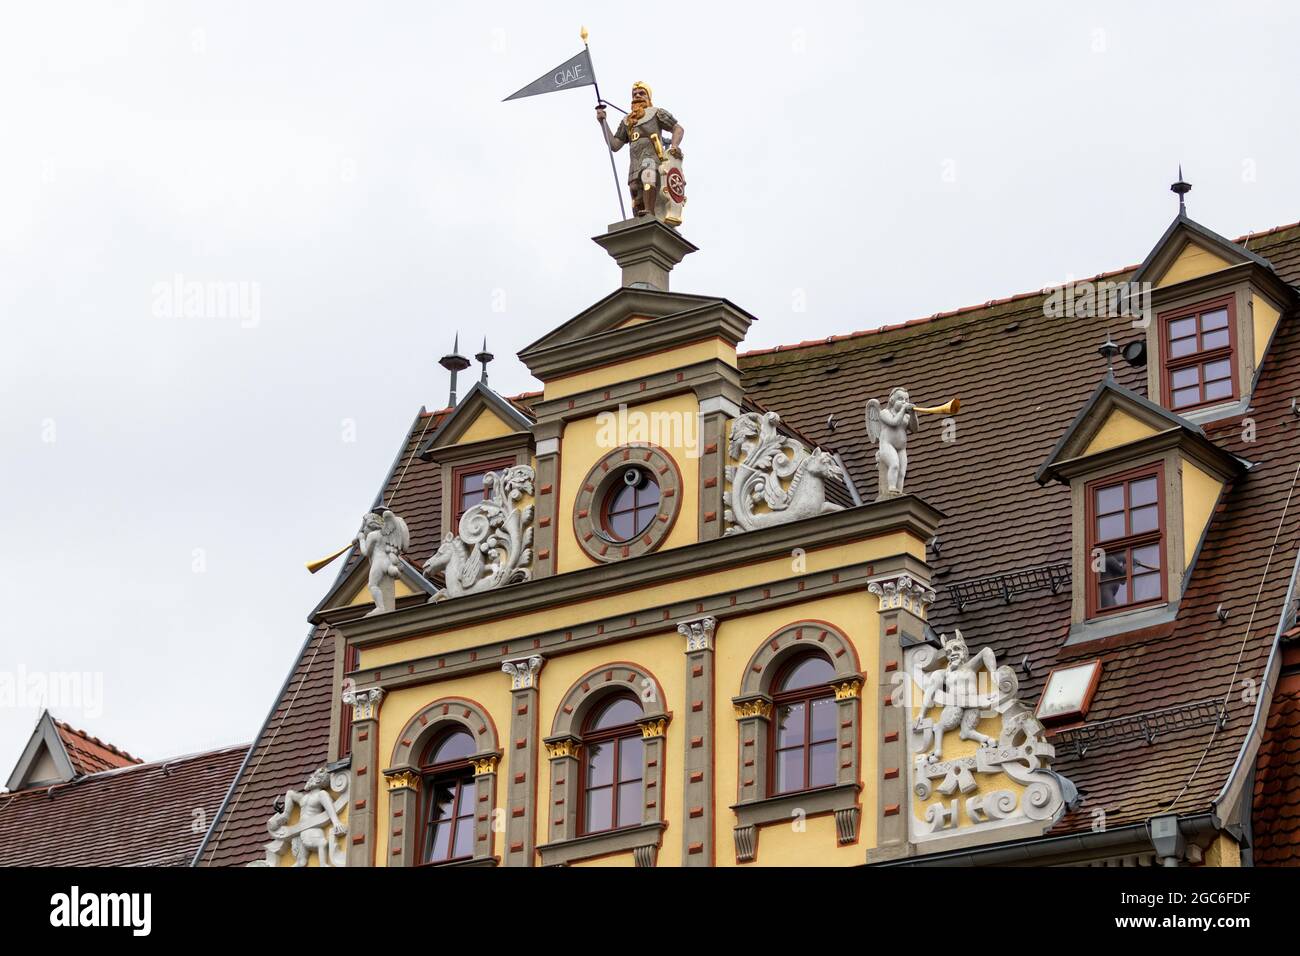 Facade of a historic building on the fish market in Erfurt with a sculpture of a warrior on top Stock Photo